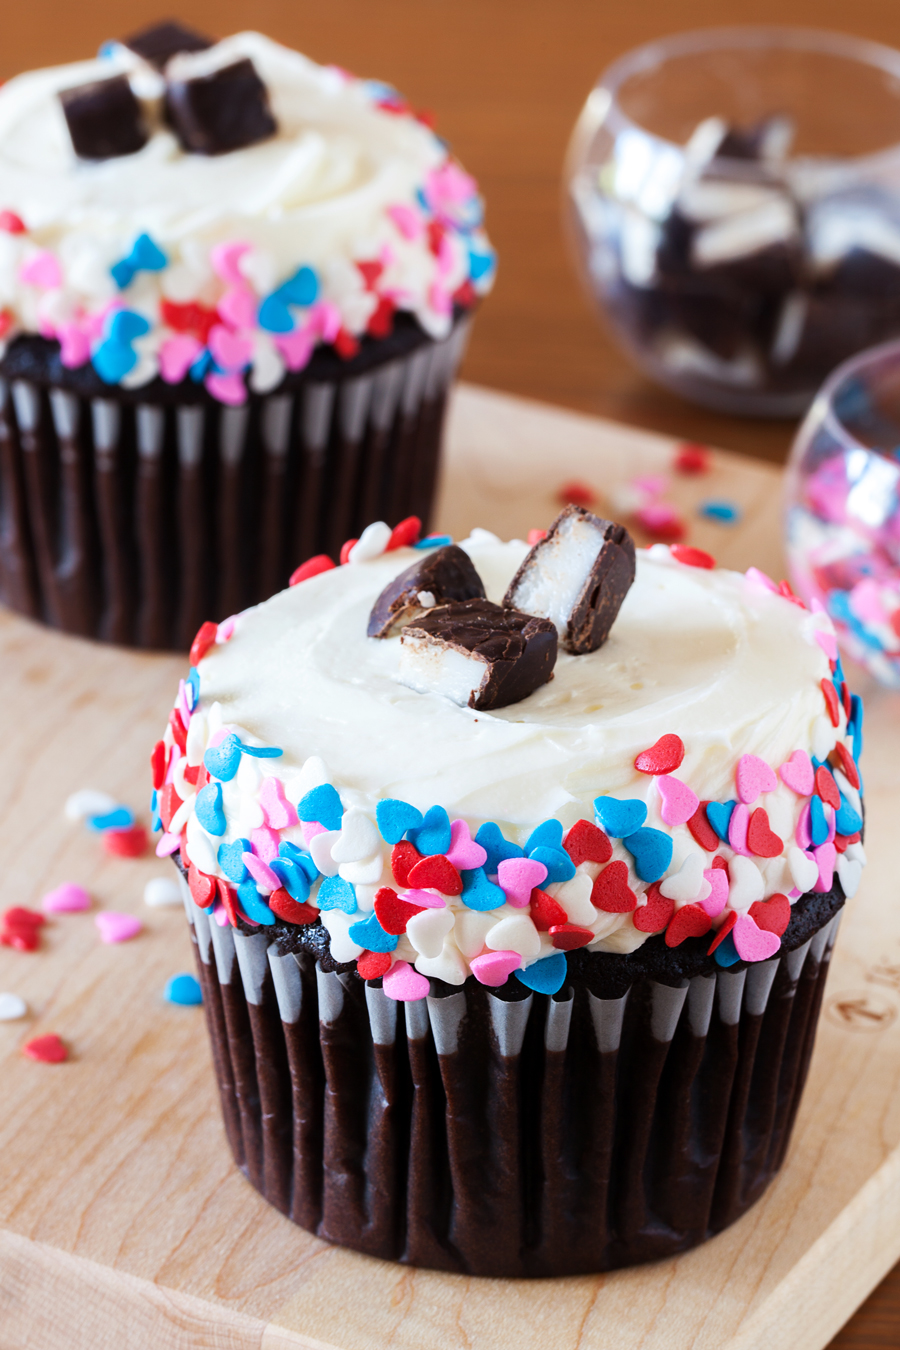 Two chocolate cupcakes with peppermint frosting and heart sprinkles.